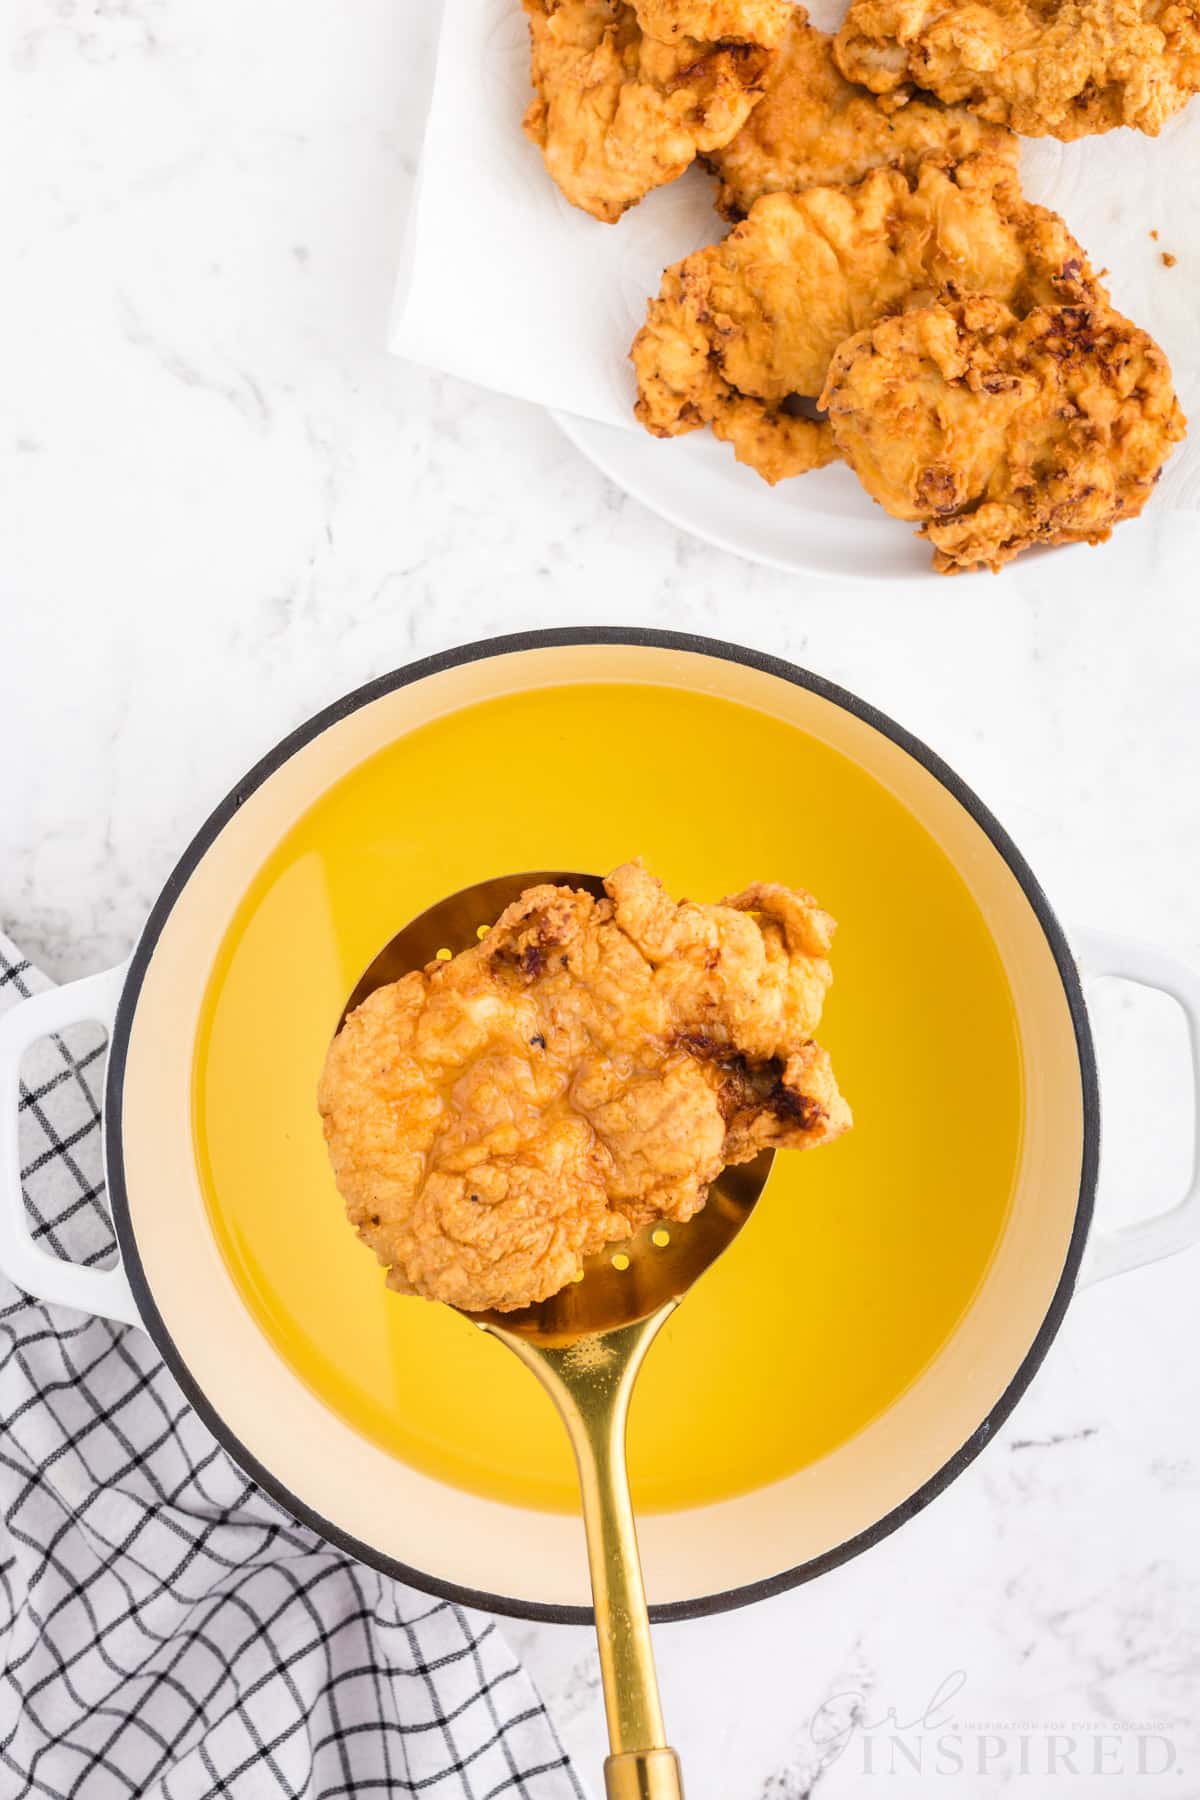 Fried chicken breast on slotted spoon over Dutch oven filled with vegetable oil, blue and black checked linen, serving plate of crispy fried chicken pieces, on a white marble surface.